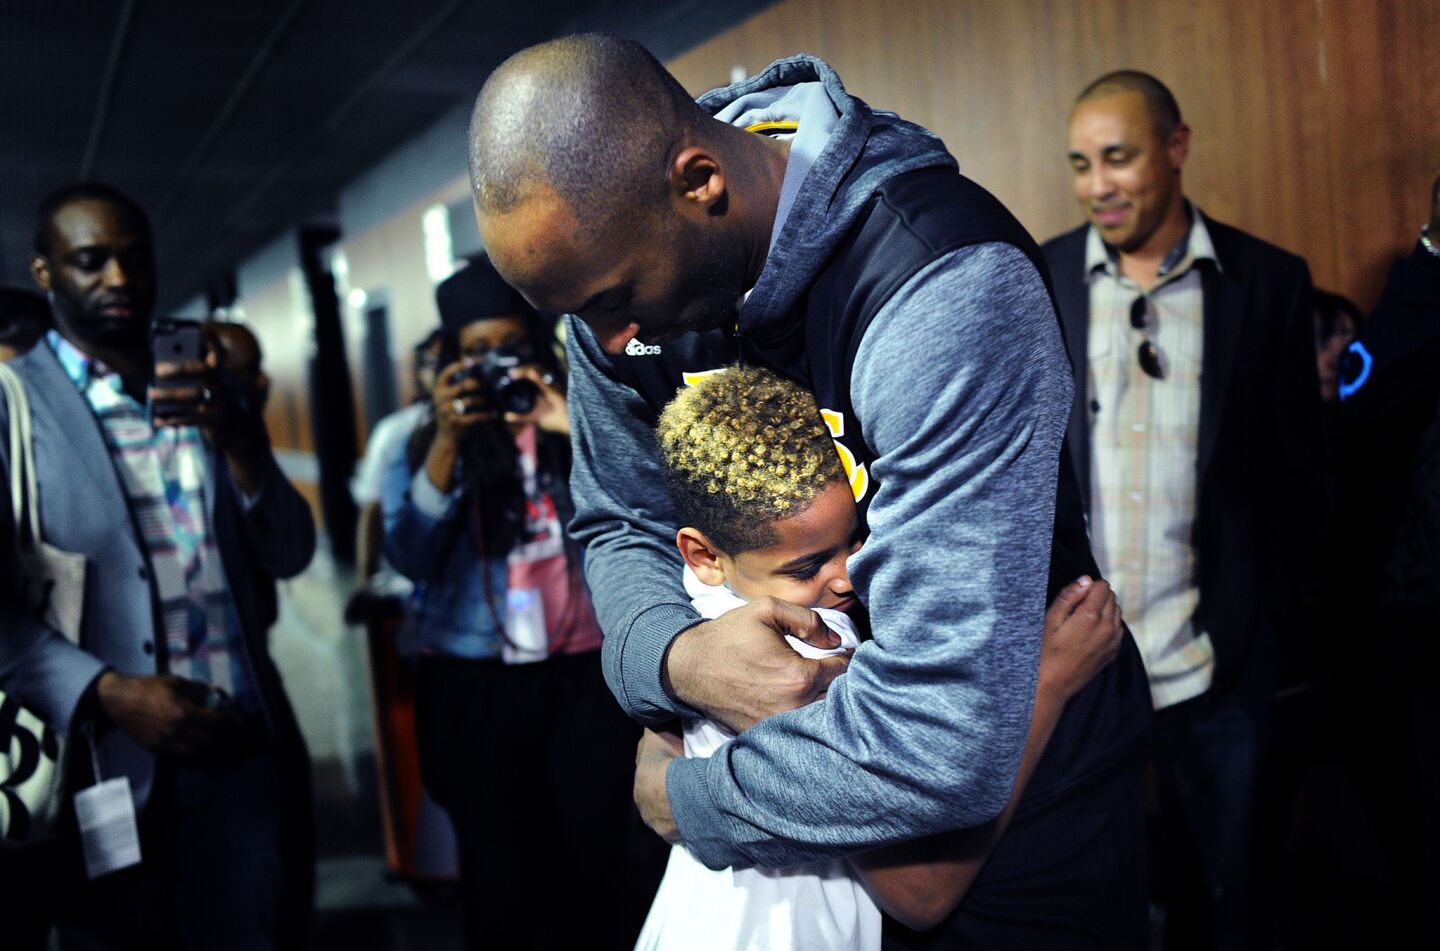 Kobe Bryant hugs Knicks Carmelo Anthony's son, Kiyan, after the game at the Staples Center.